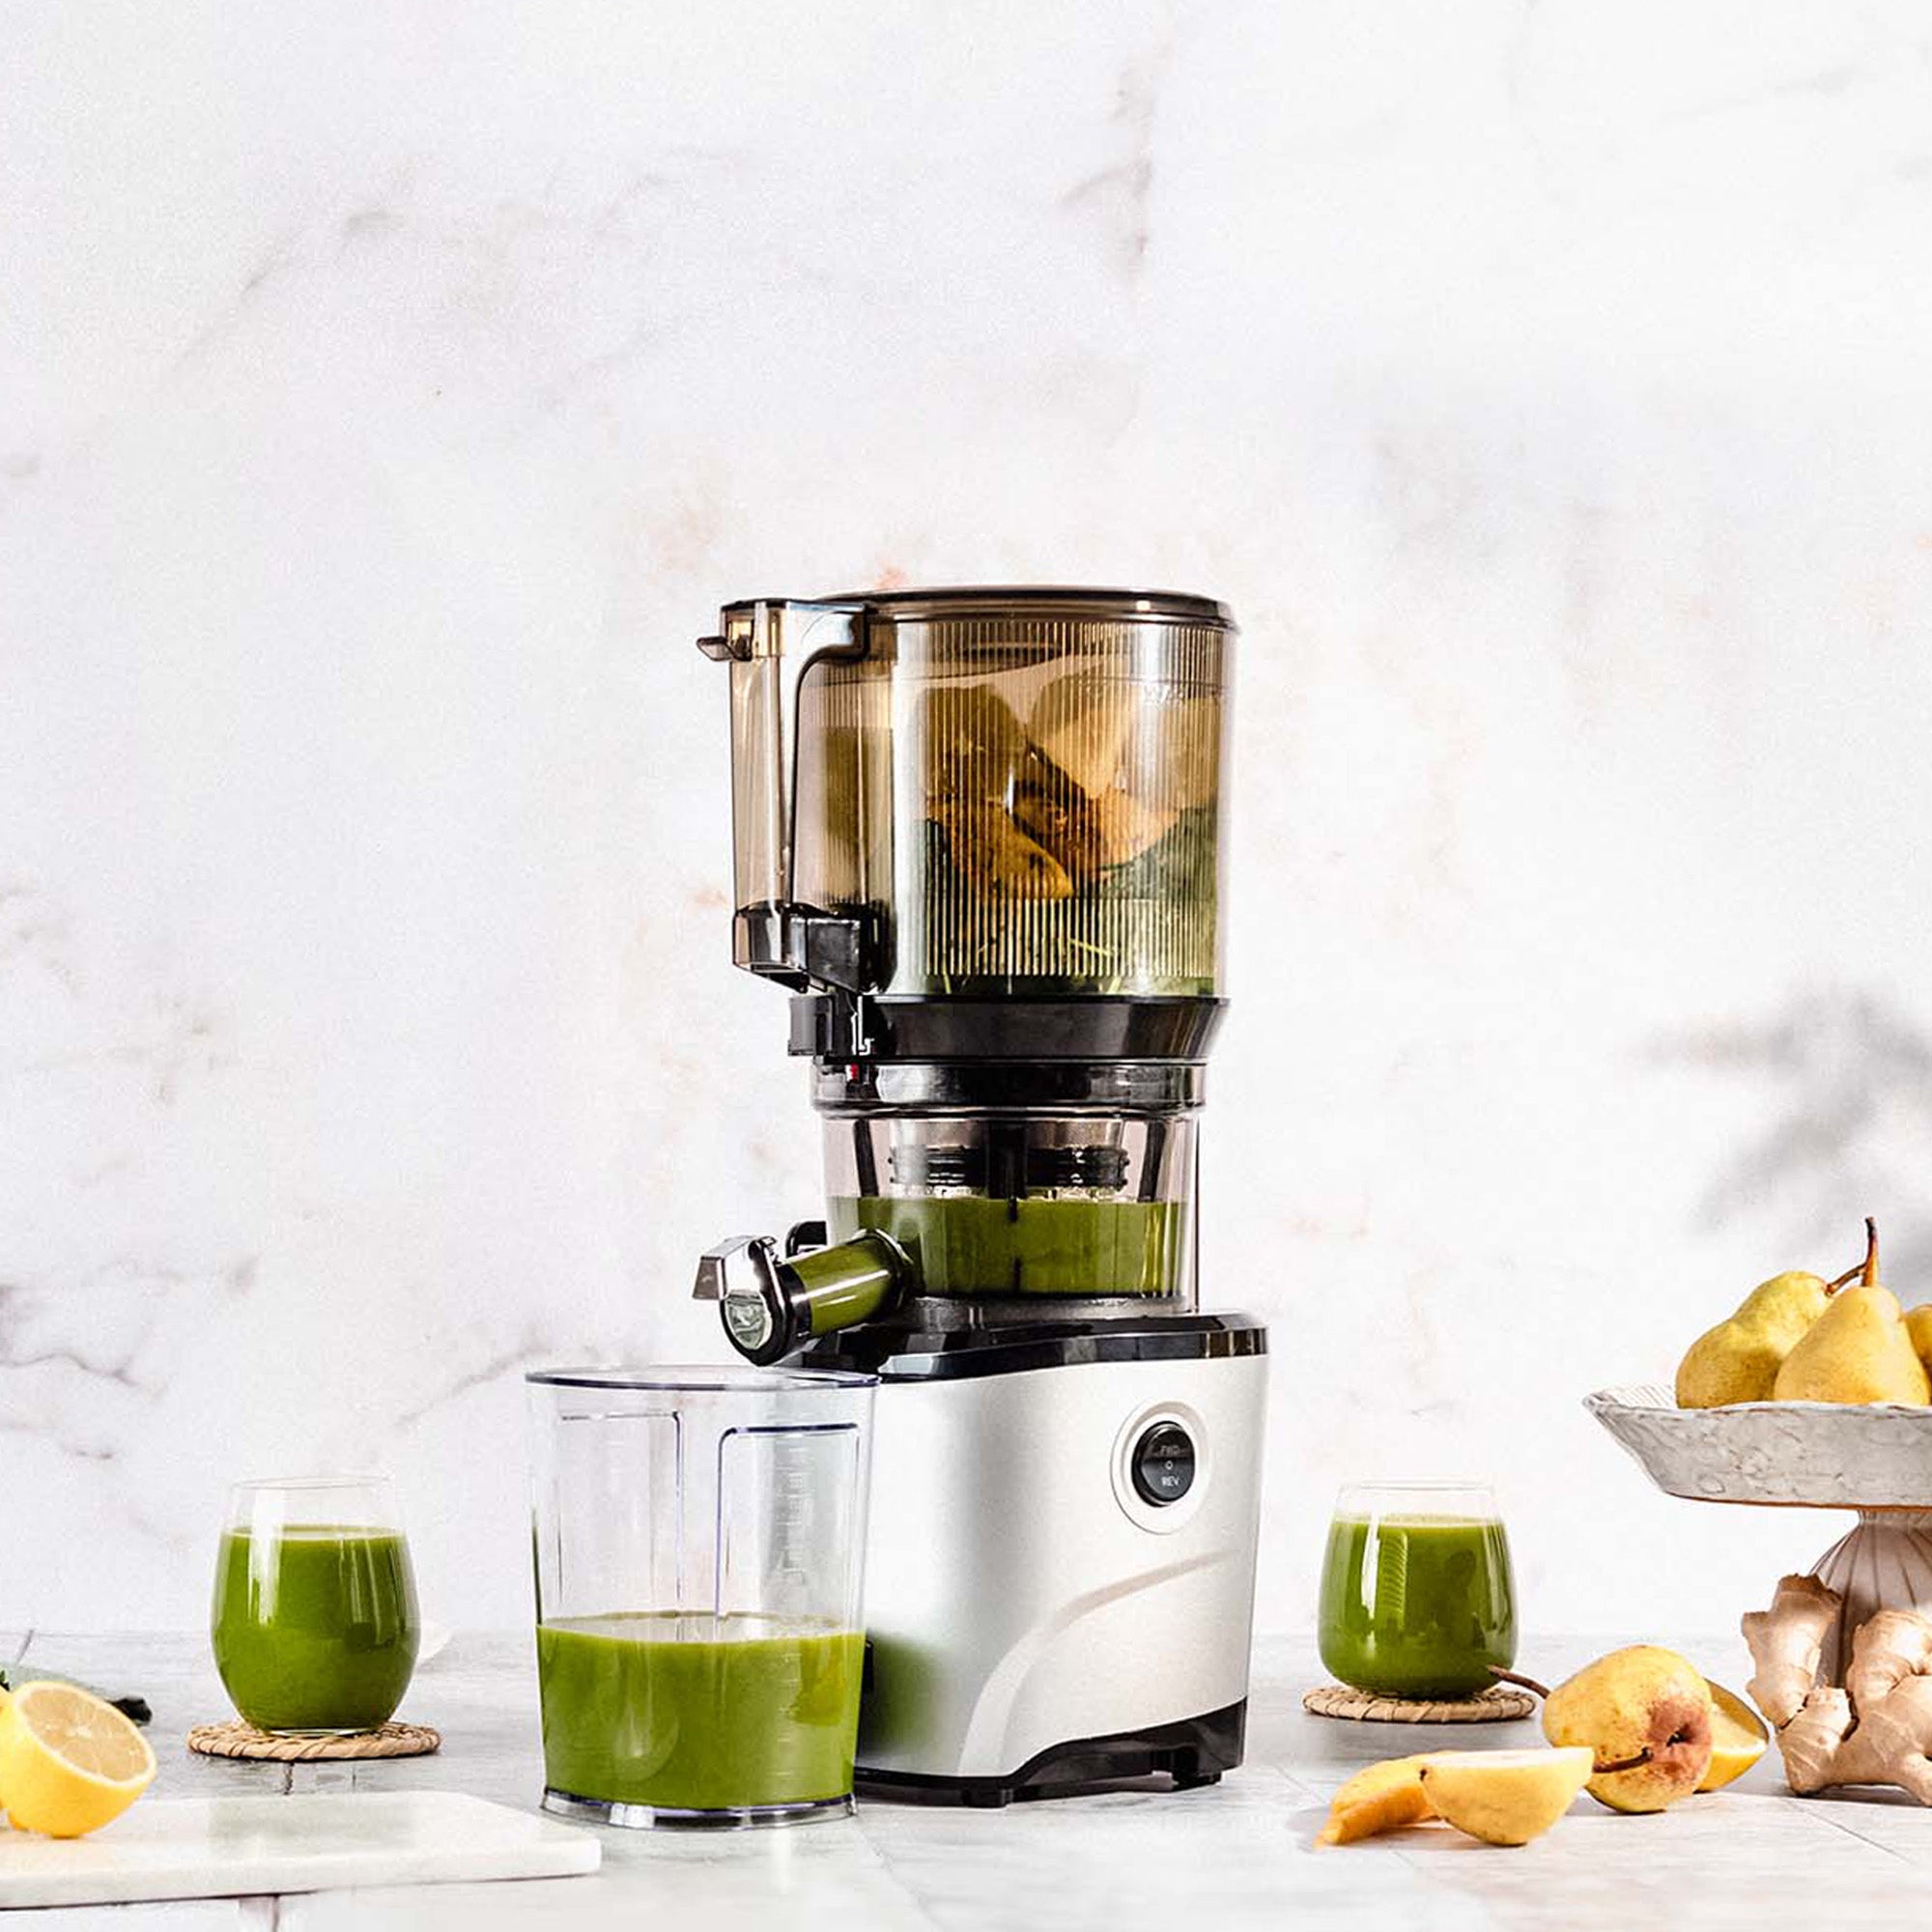 Buy electric juicer Online in Ireland at Low Prices at desertcart